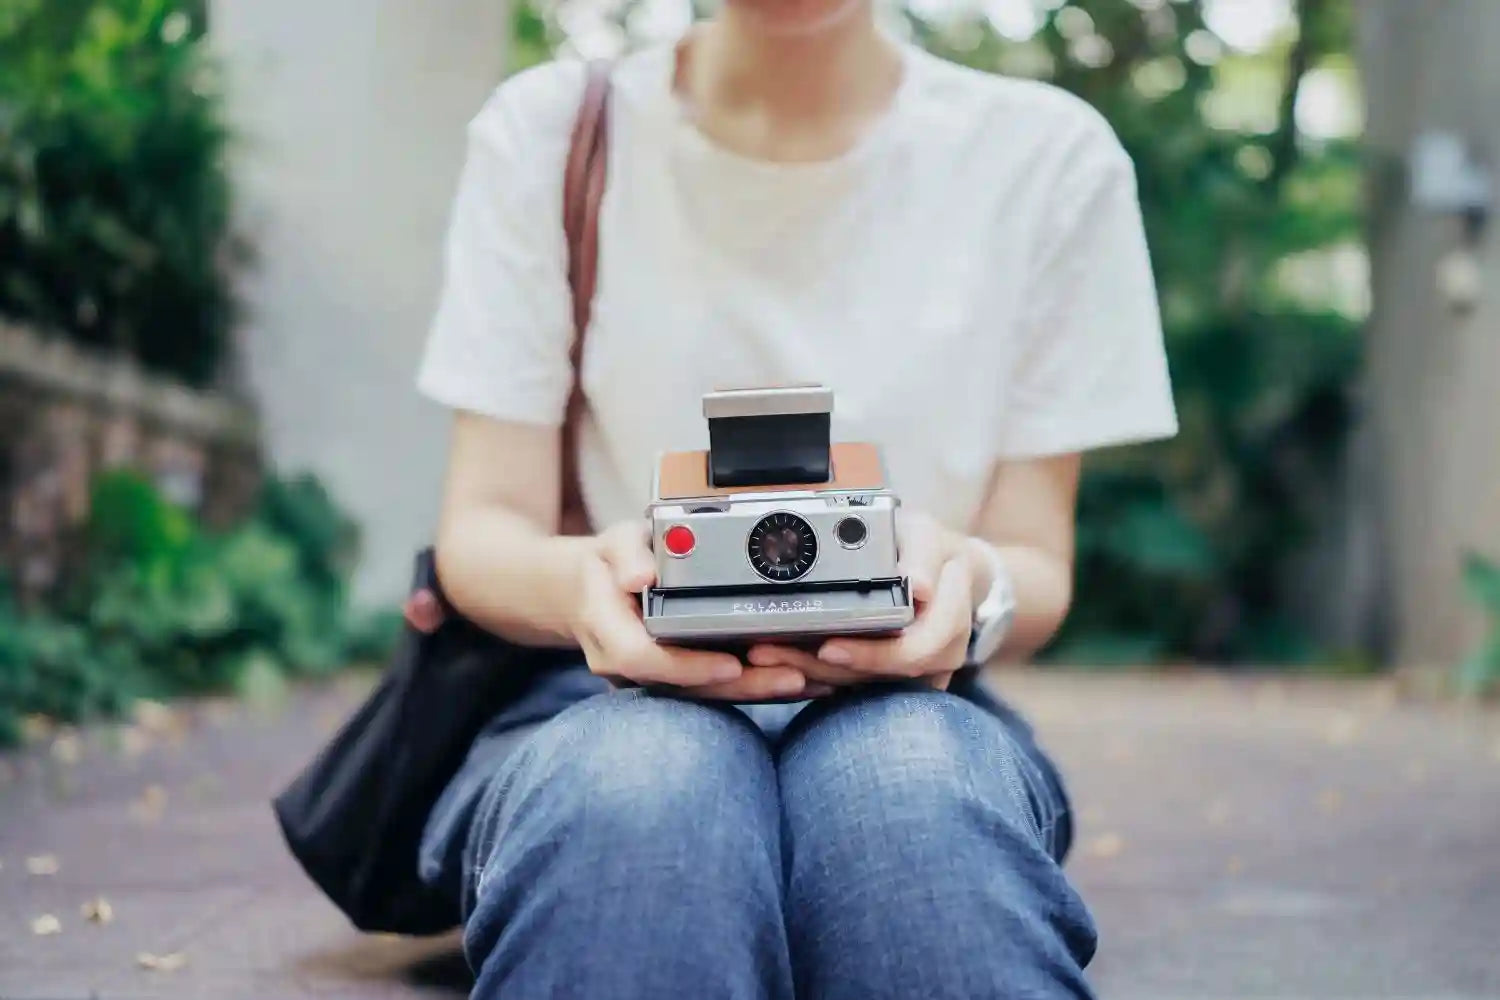 polaroid printer is putting on the woman's legs Photo by Marco Xu on unsplash